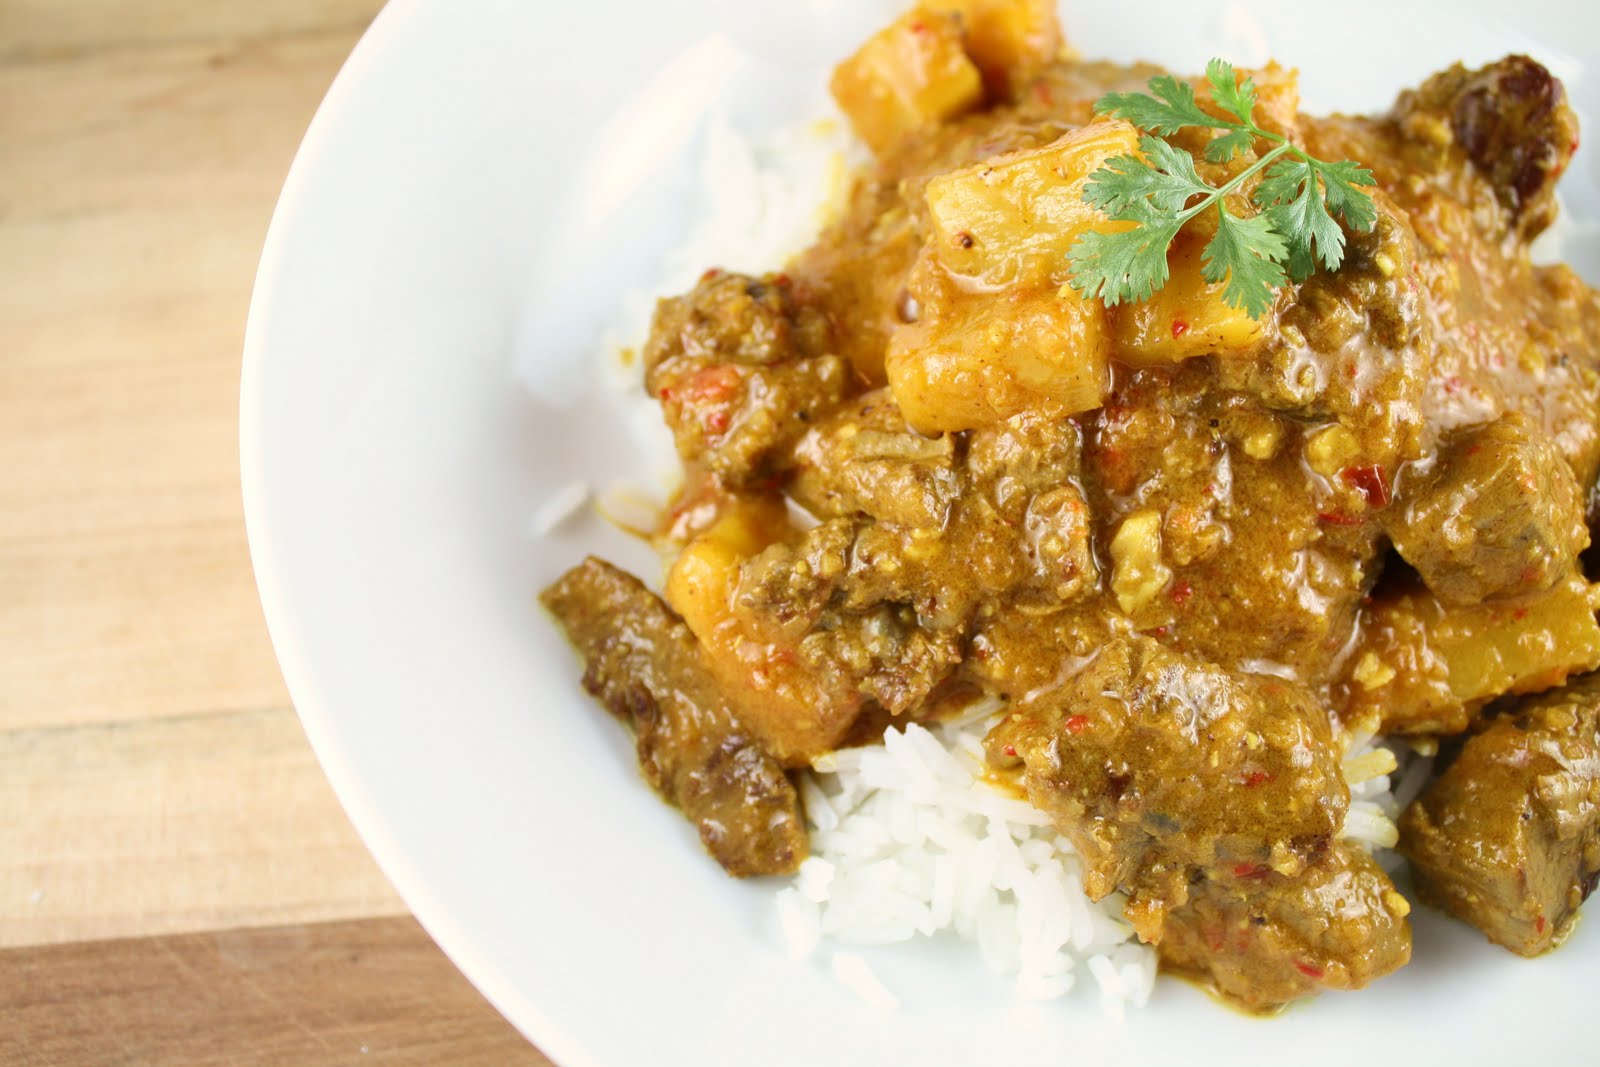 Living on Pure Land: Indonesian beef and pineapple curry over jasmine rice